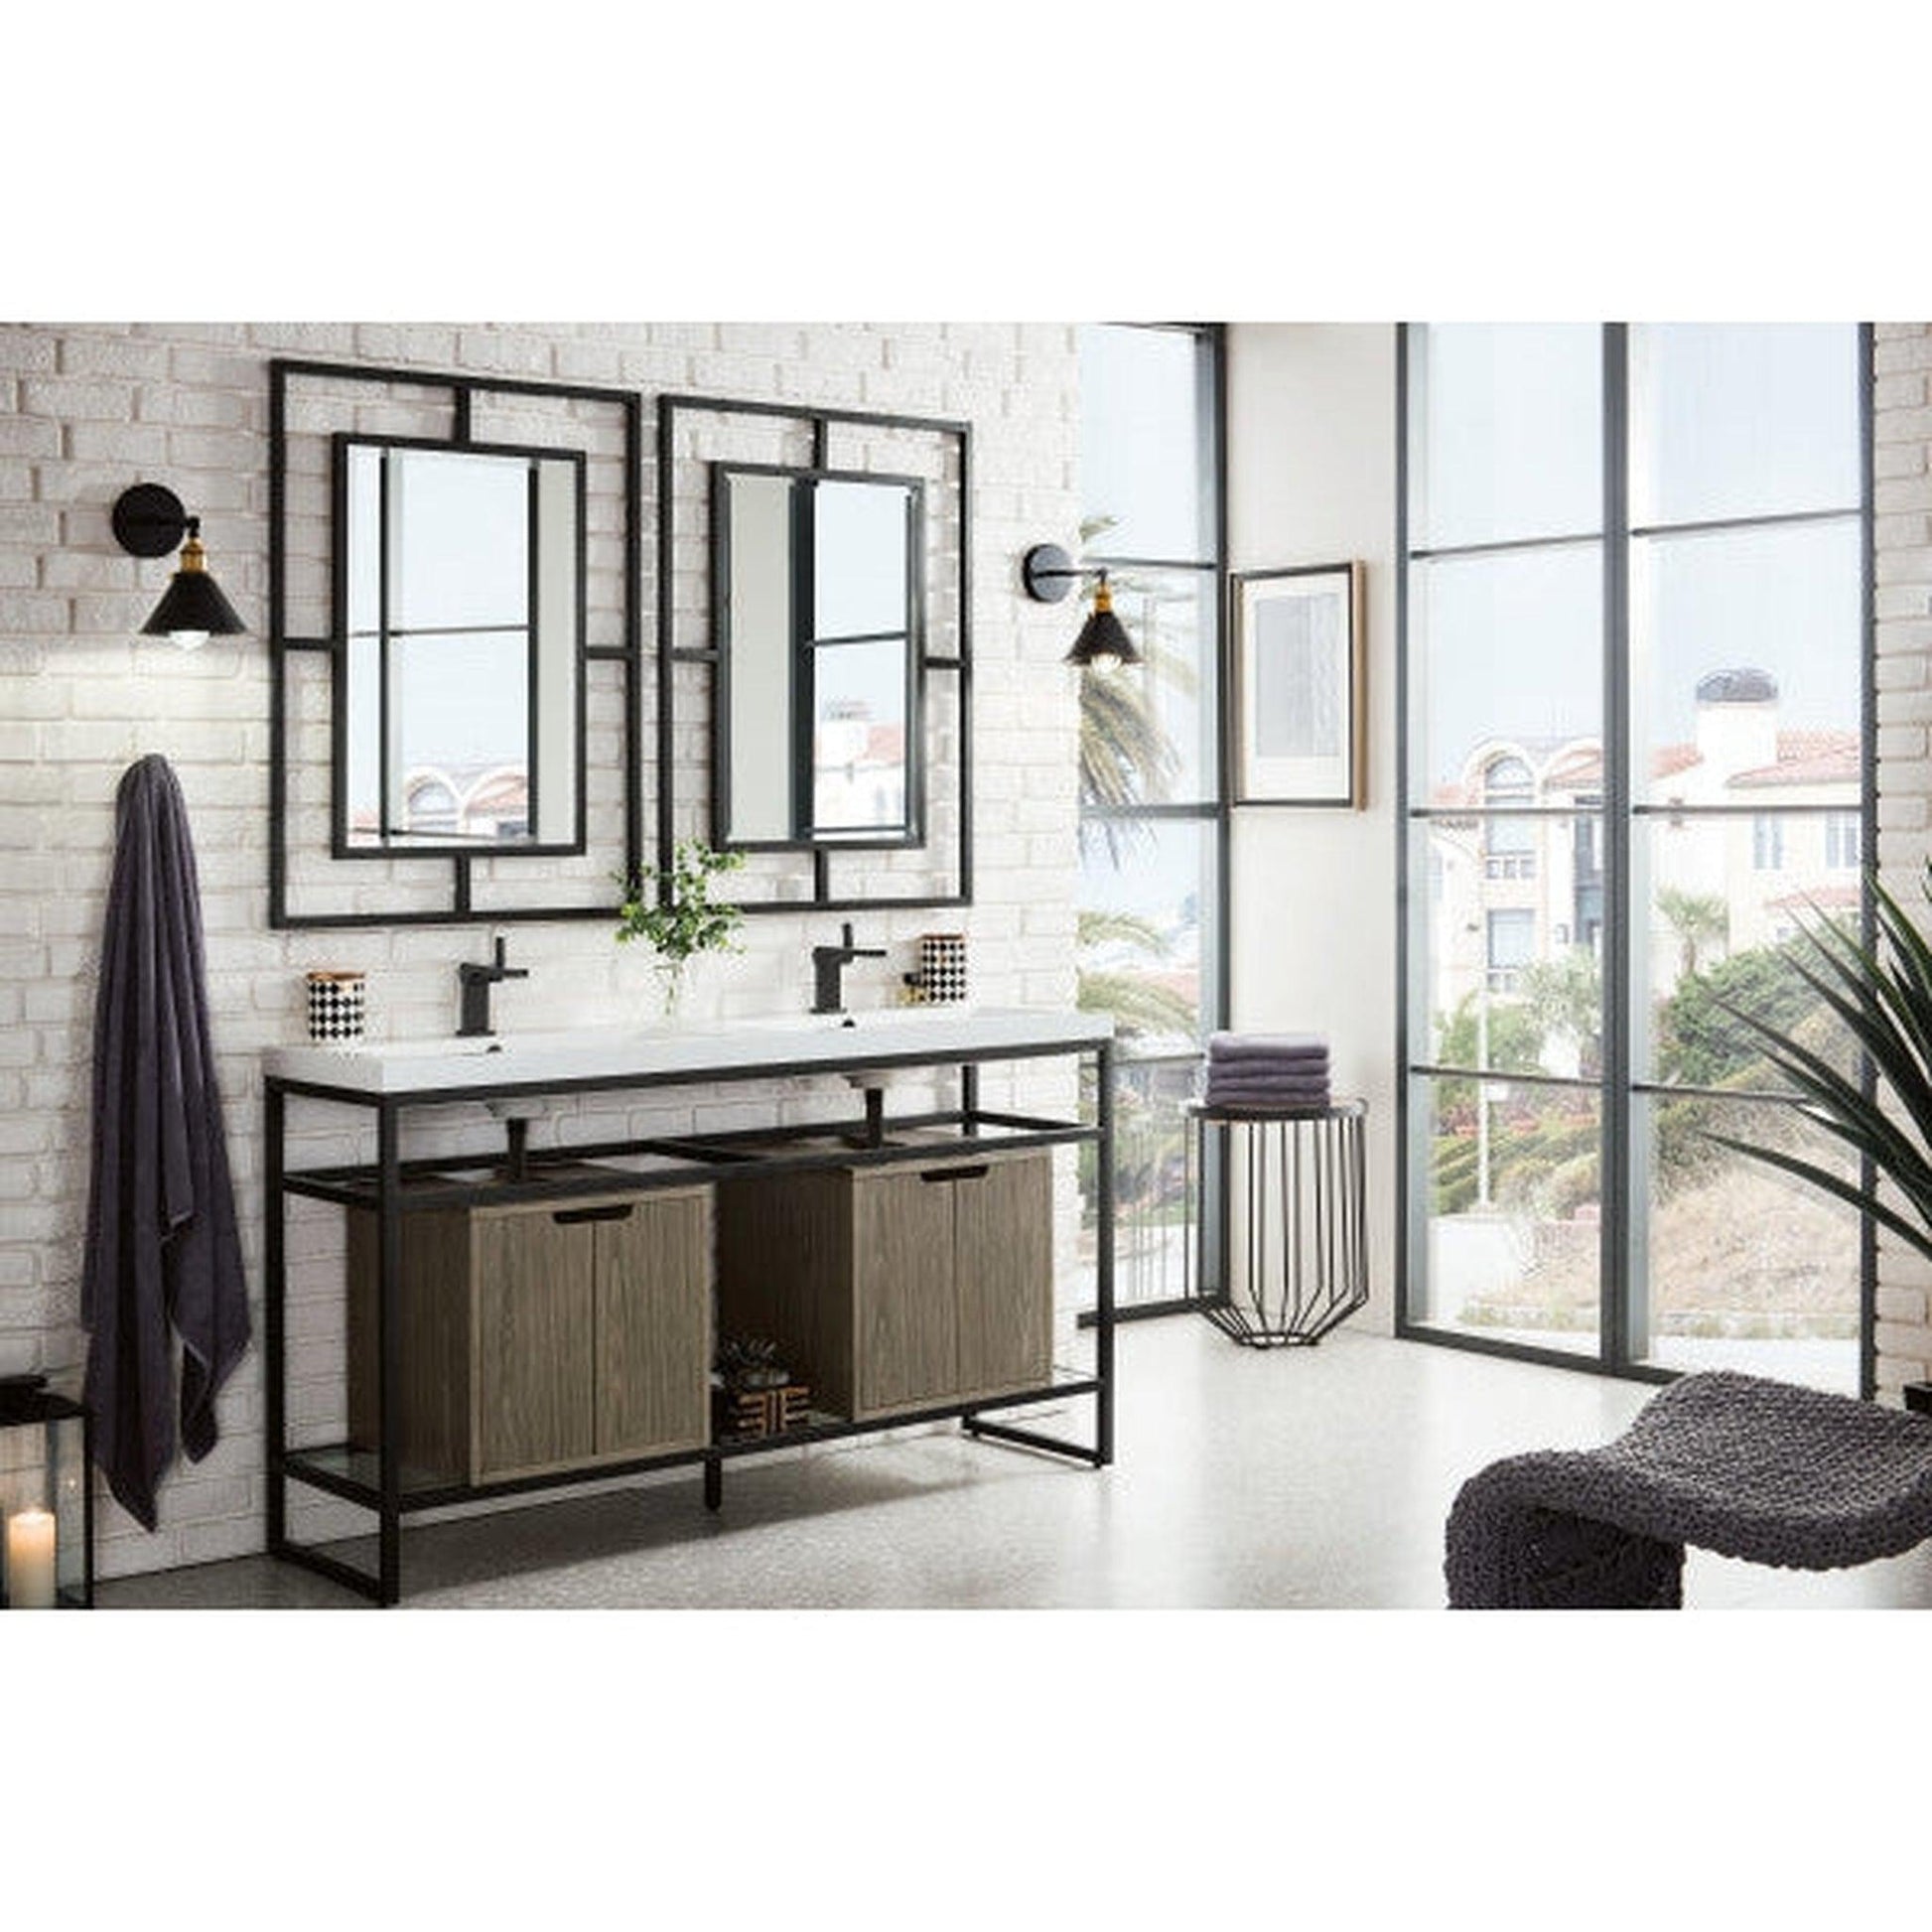 James Martin Boston 63" Double Matte Black Stainless Steel Console Sink With Ash Gray Storage Cabinet and White Glossy Composite Countertop